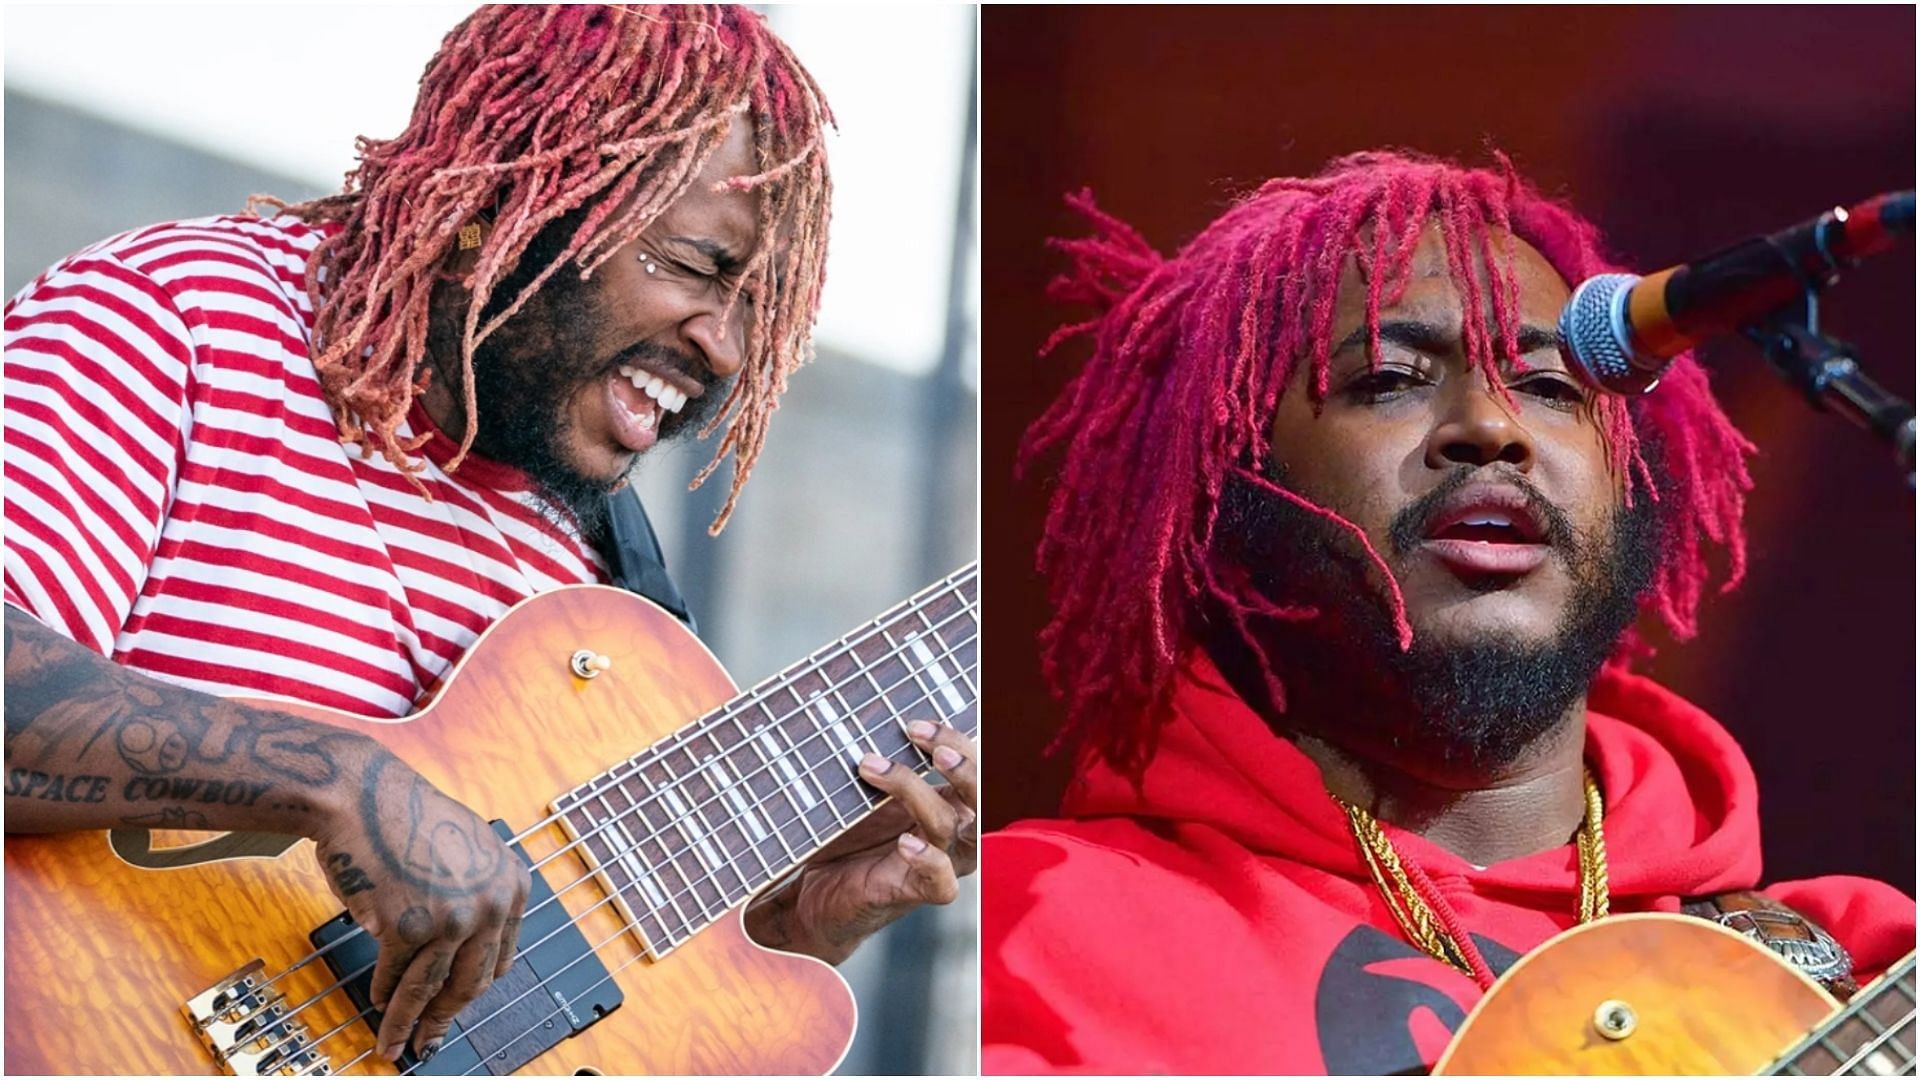 Thundercat has announced new dates for his North American Tour (Images via Douglas Mason and Prince William /Getty Images)